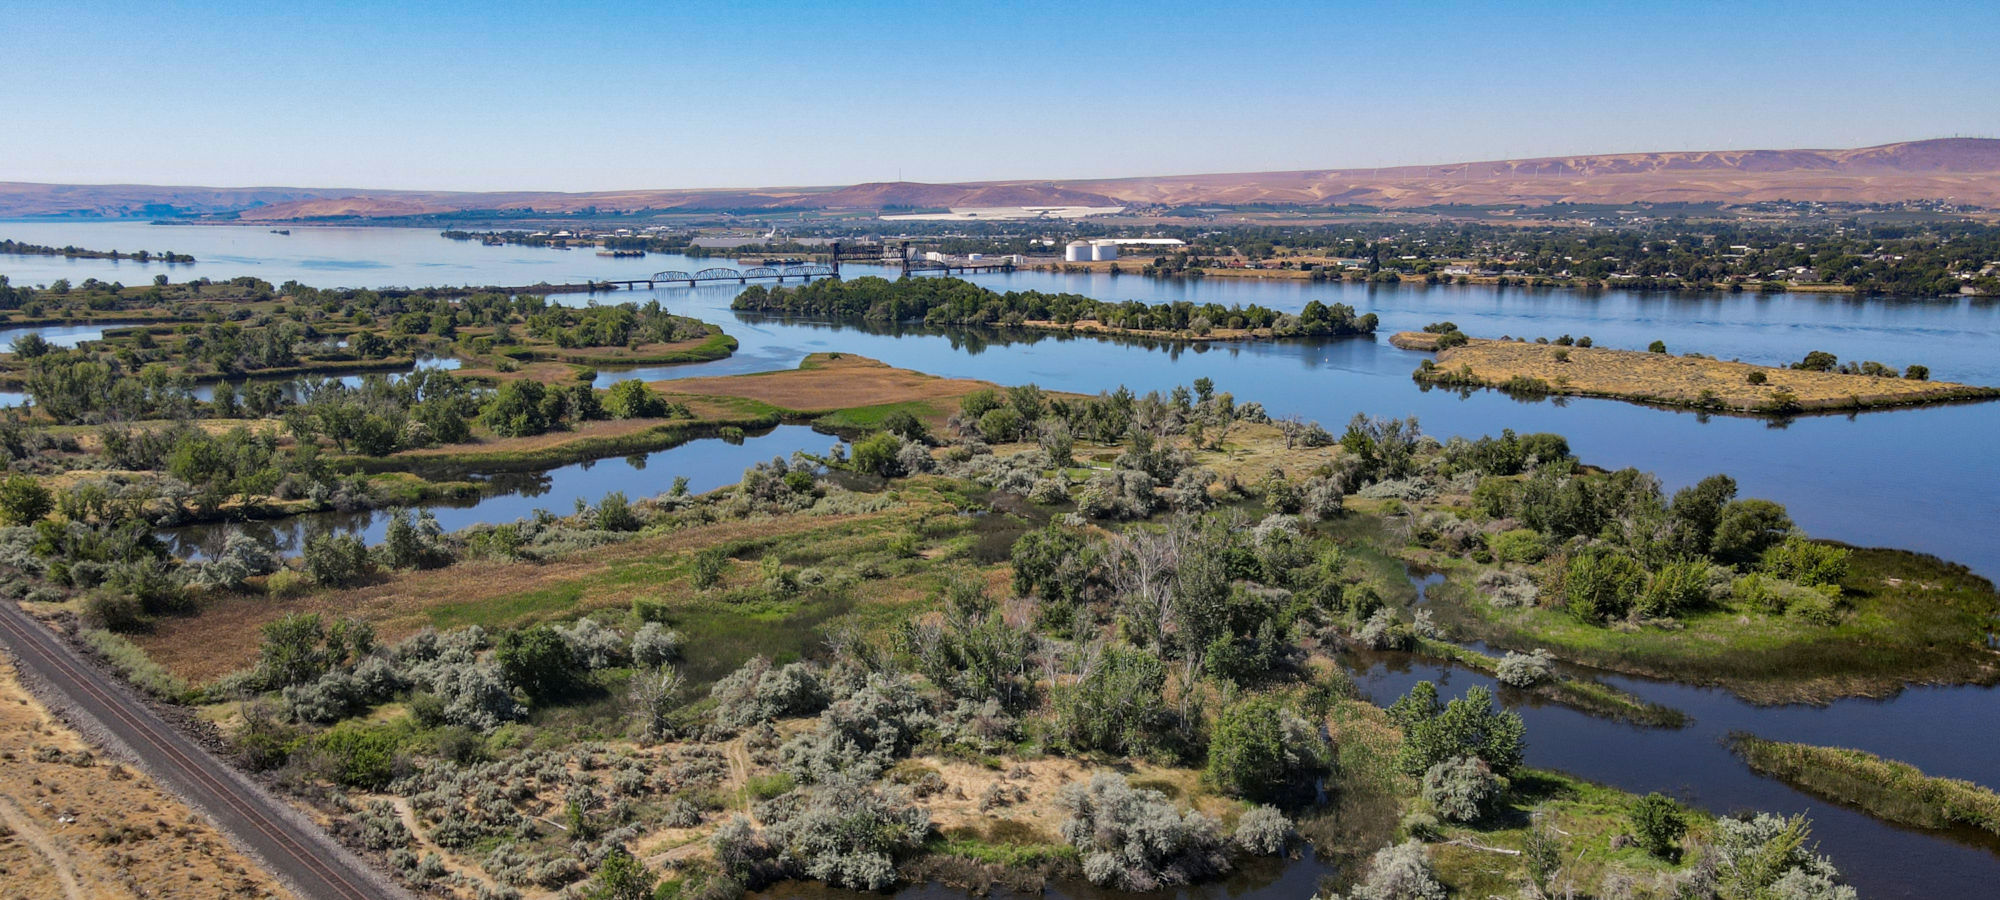 Waterfront Homes For Sale in West Richland WA, Riverfront Property, Real Estate, MLS Listings